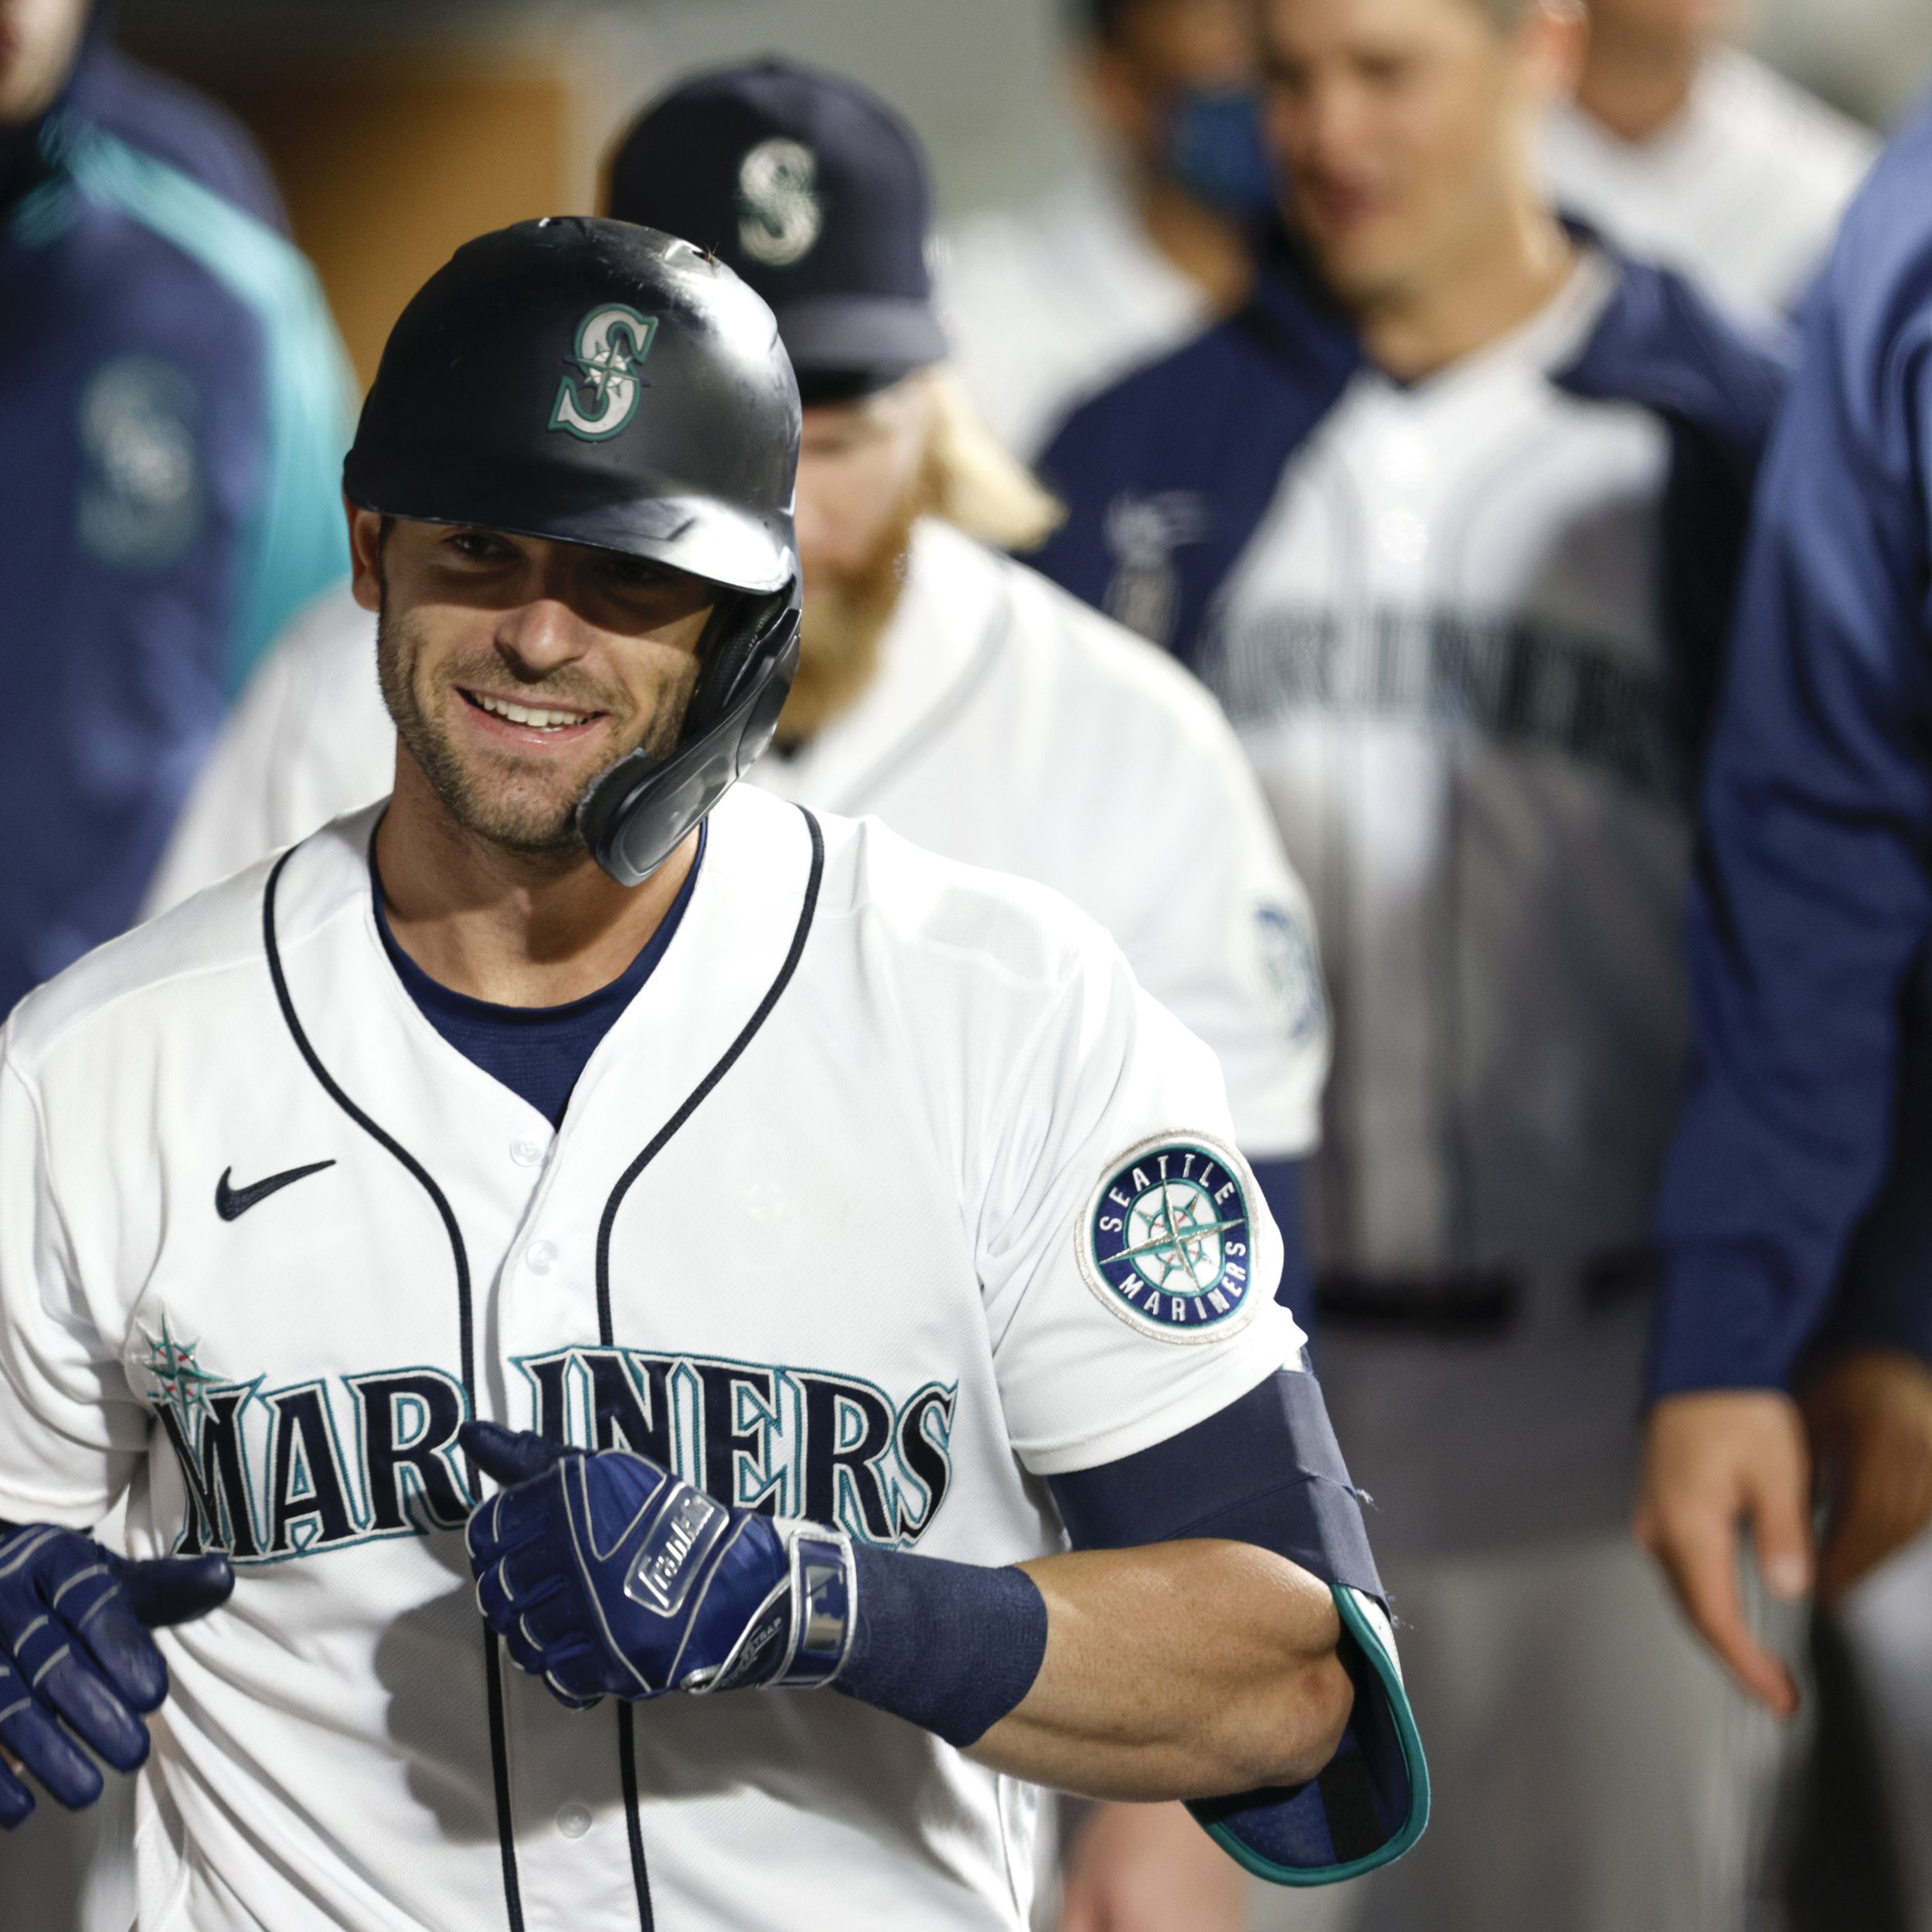 The Yankees could add a slugger at the deadline in Mitch Haniger